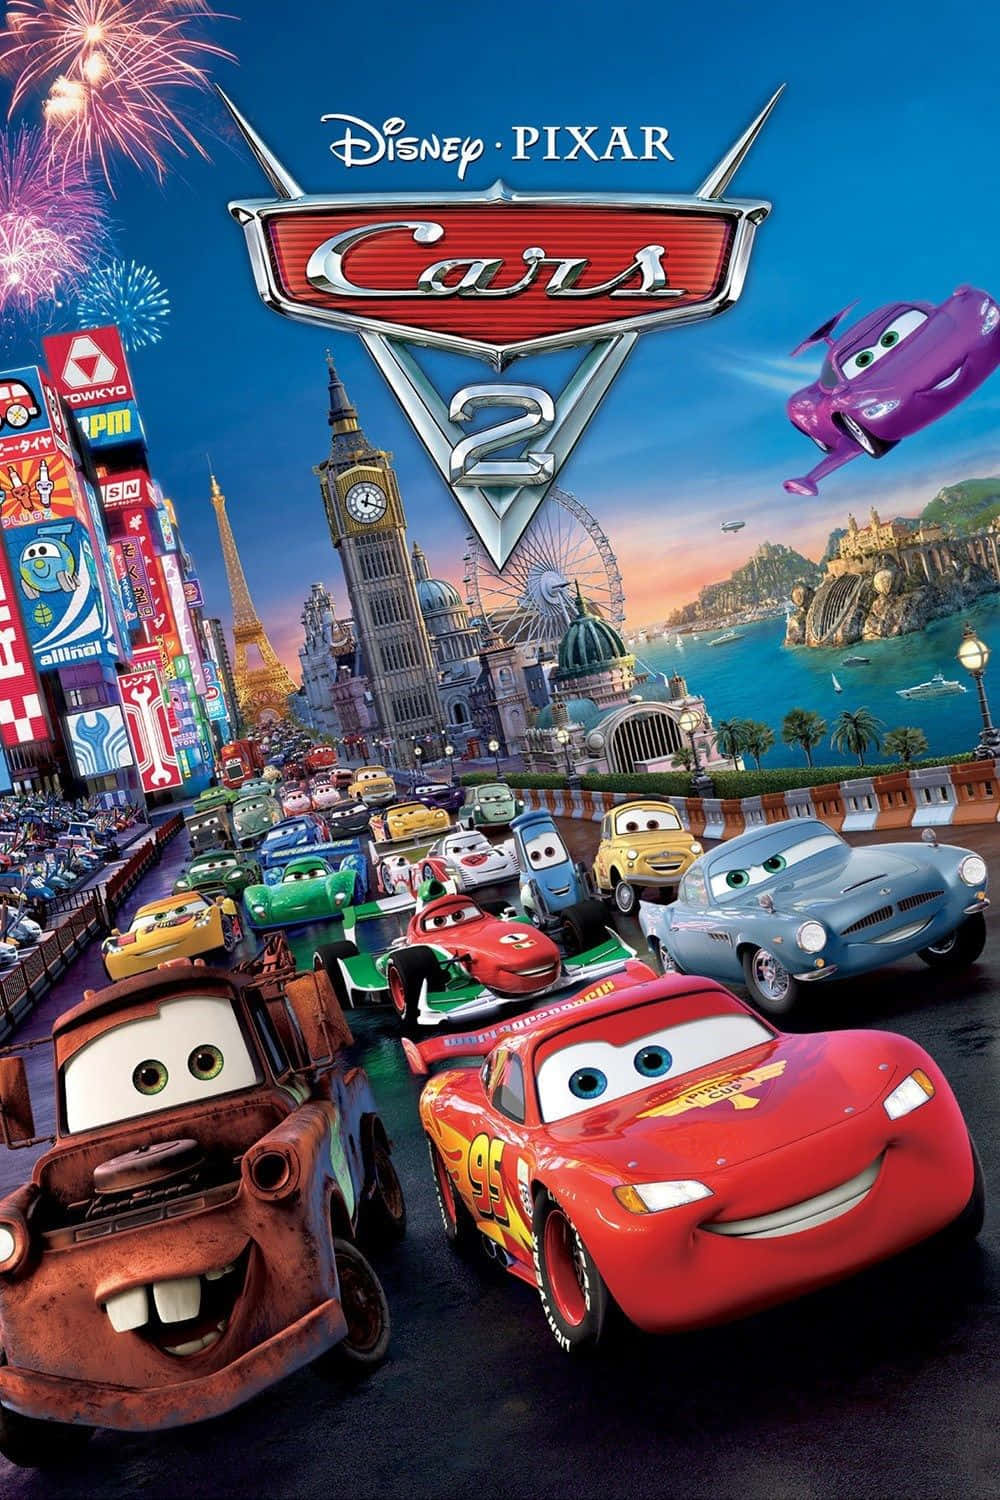 Cars 2 Movie Poster With Cars And Fireworks